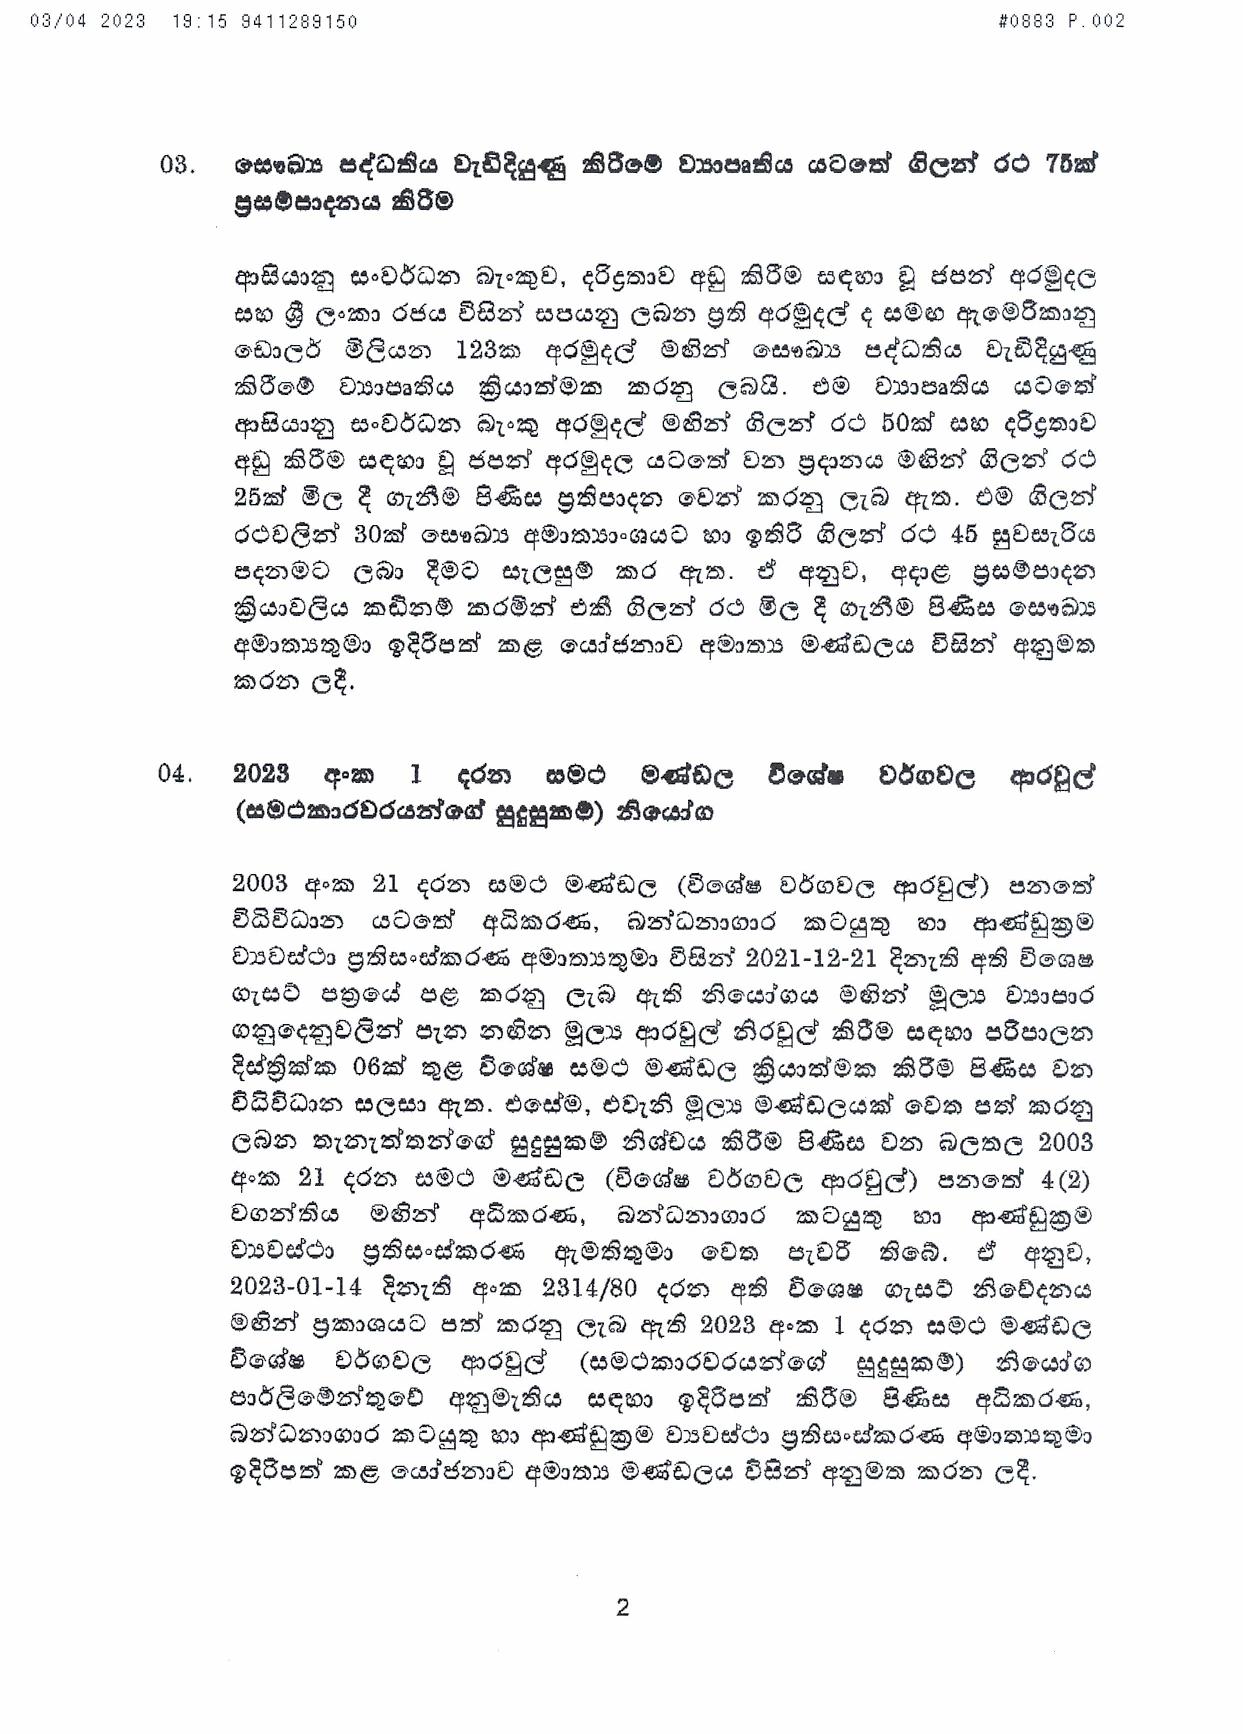 Cabinet Decision on 03.04.2023 page 002